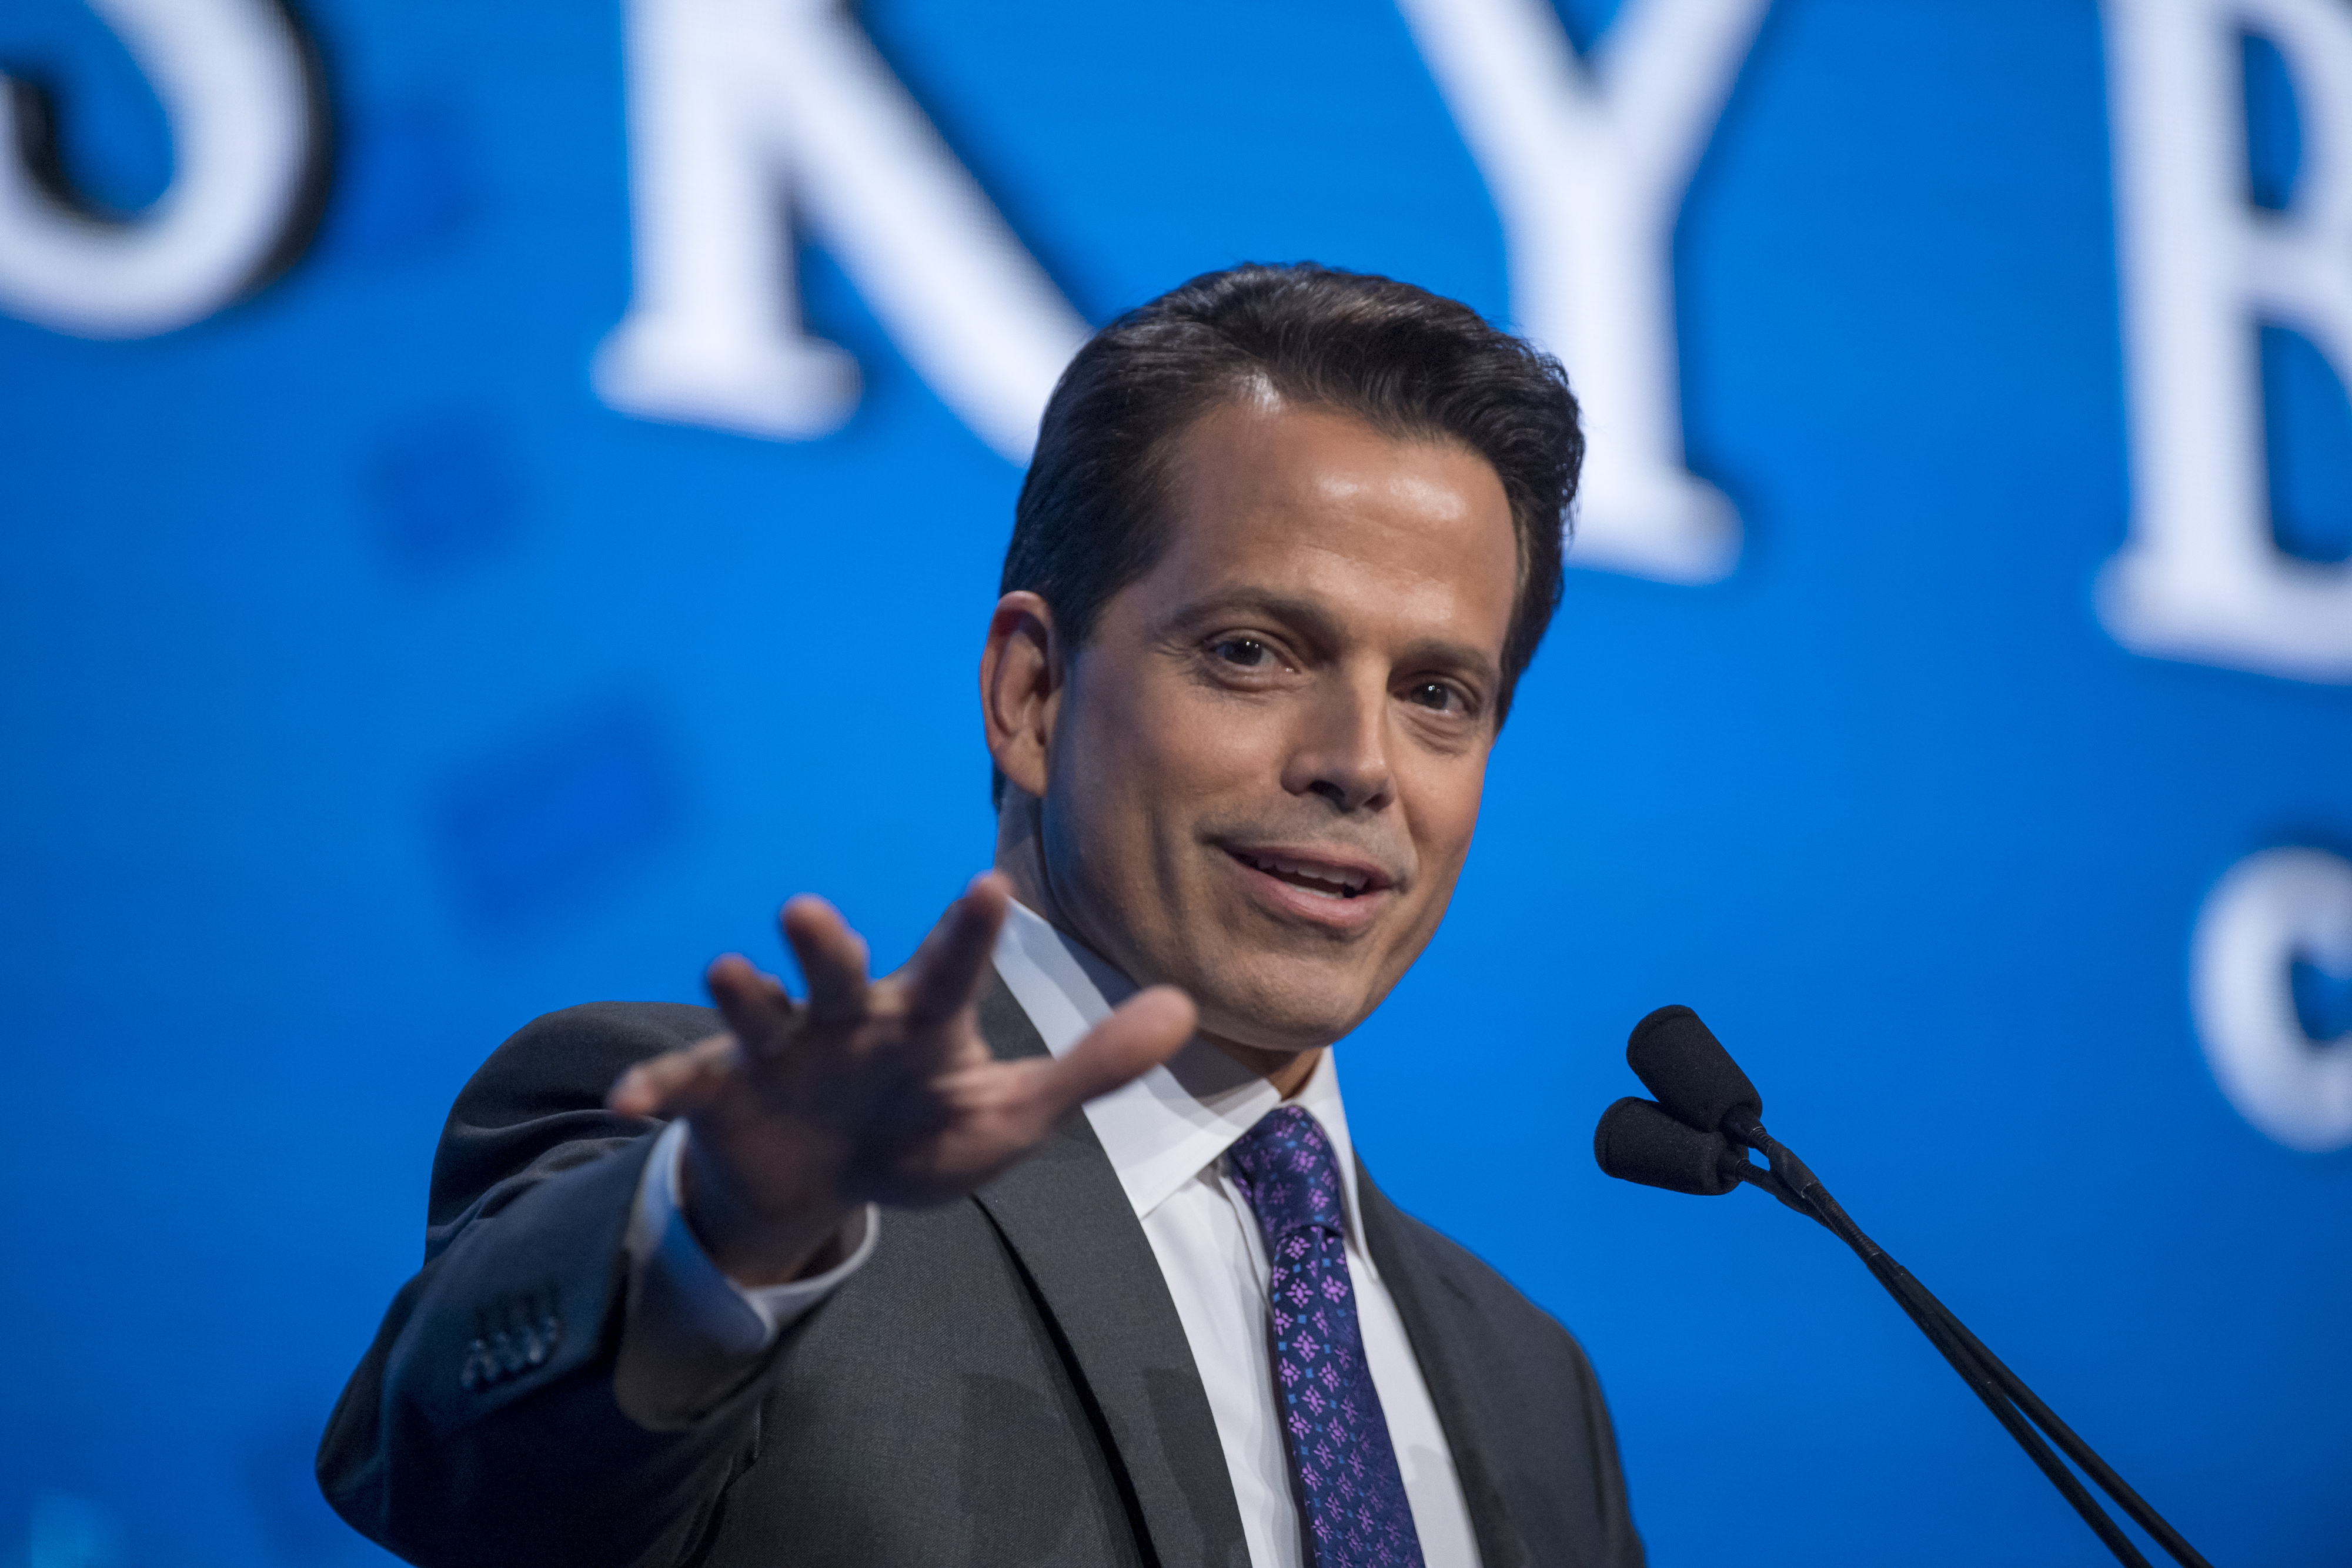 Anthony Scaramucci, founder of SkyBridge Capital LLC, speaks during the Skybridge Alternatives (SALT) conference in Las Vegas, Nevada, U.S., on Wednesday, May 17, 2017. (David Paul Morris—Bloomberg/Getty Images)